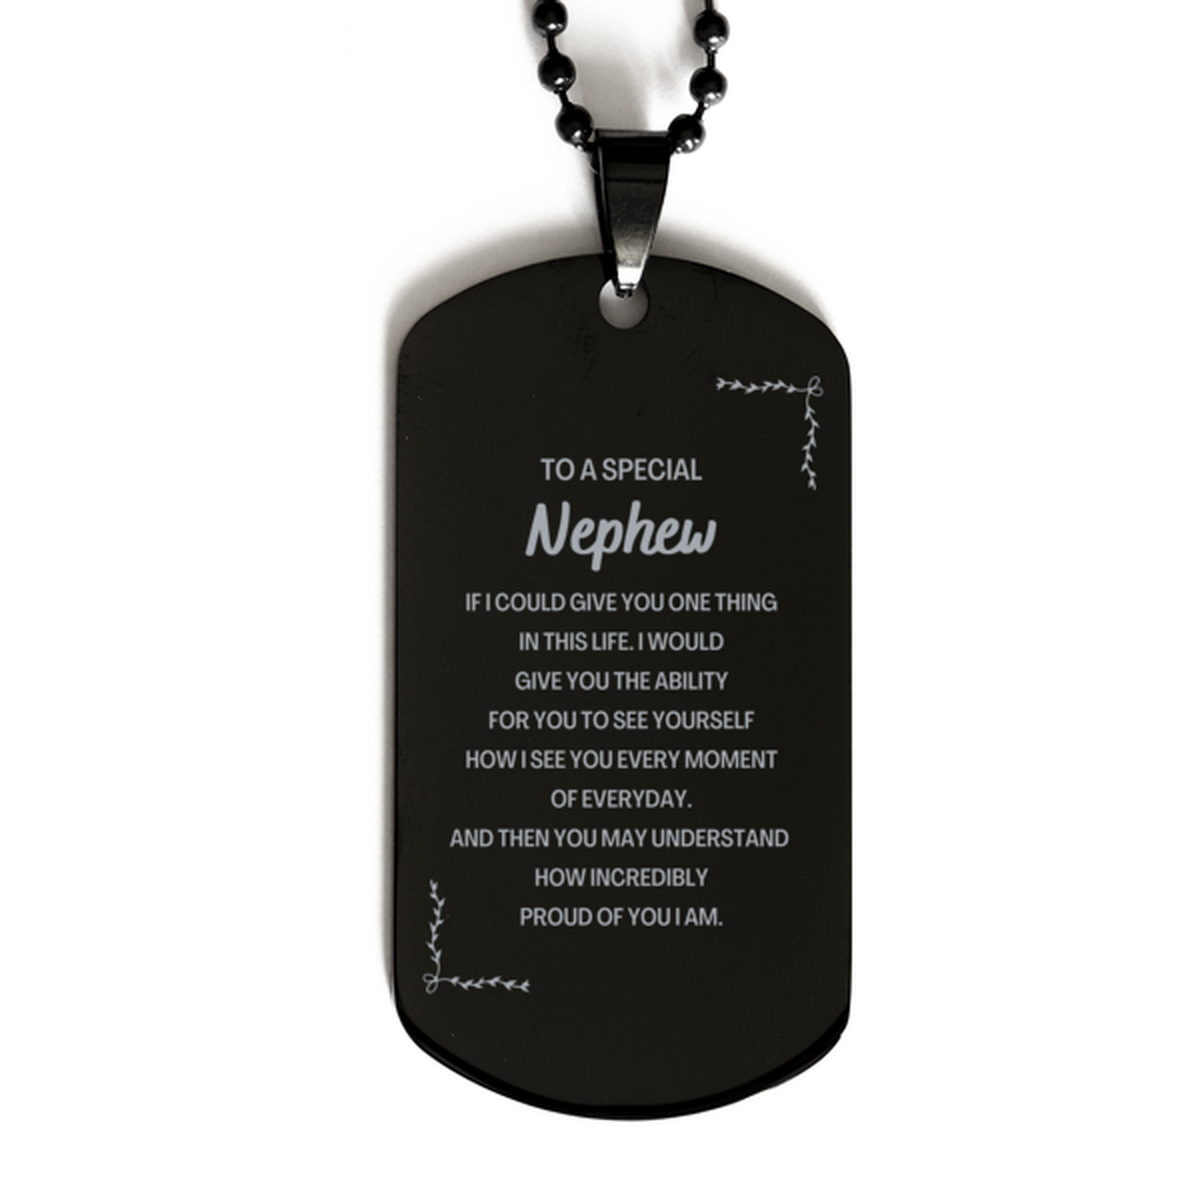 To My Nephew Black Dog Tag, Gifts For Nephew Engraved, Inspirational Gifts for Christmas Birthday, Epic Gifts for Nephew To A Special Nephew how incredibly proud of you I am